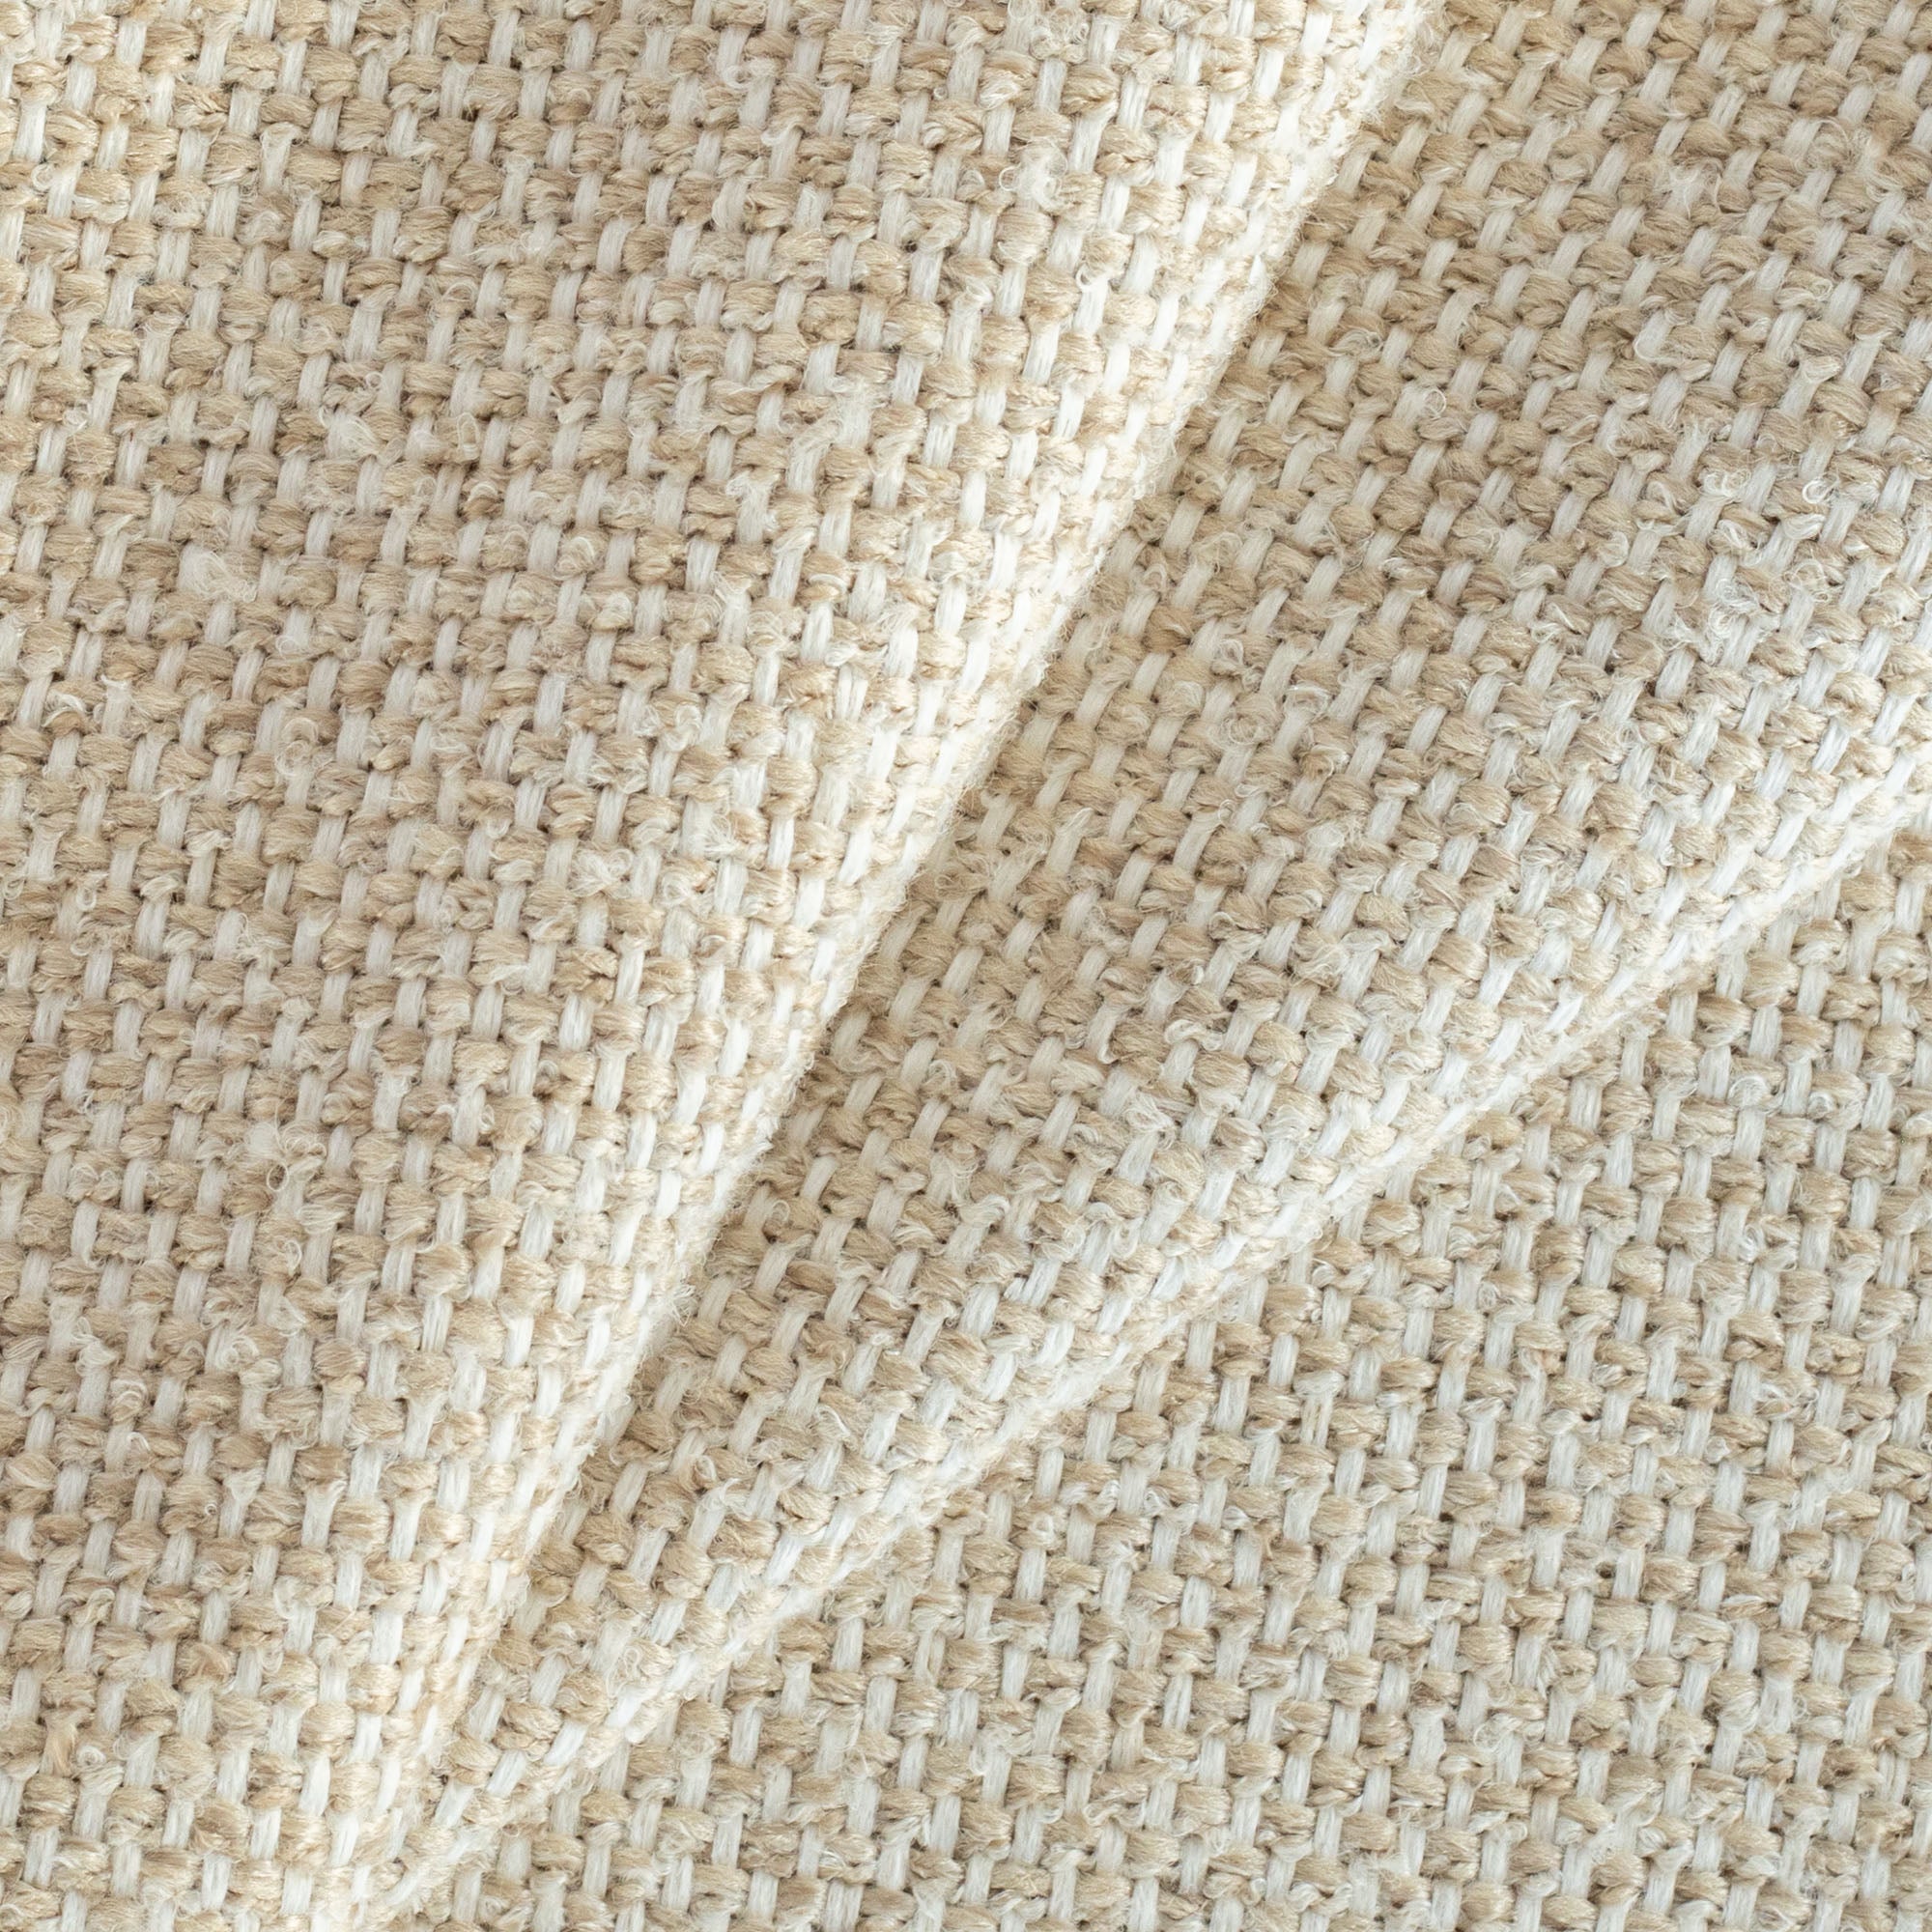 Austin wheat, a light camel and white textured woven upholstery fabric from Tonic Living